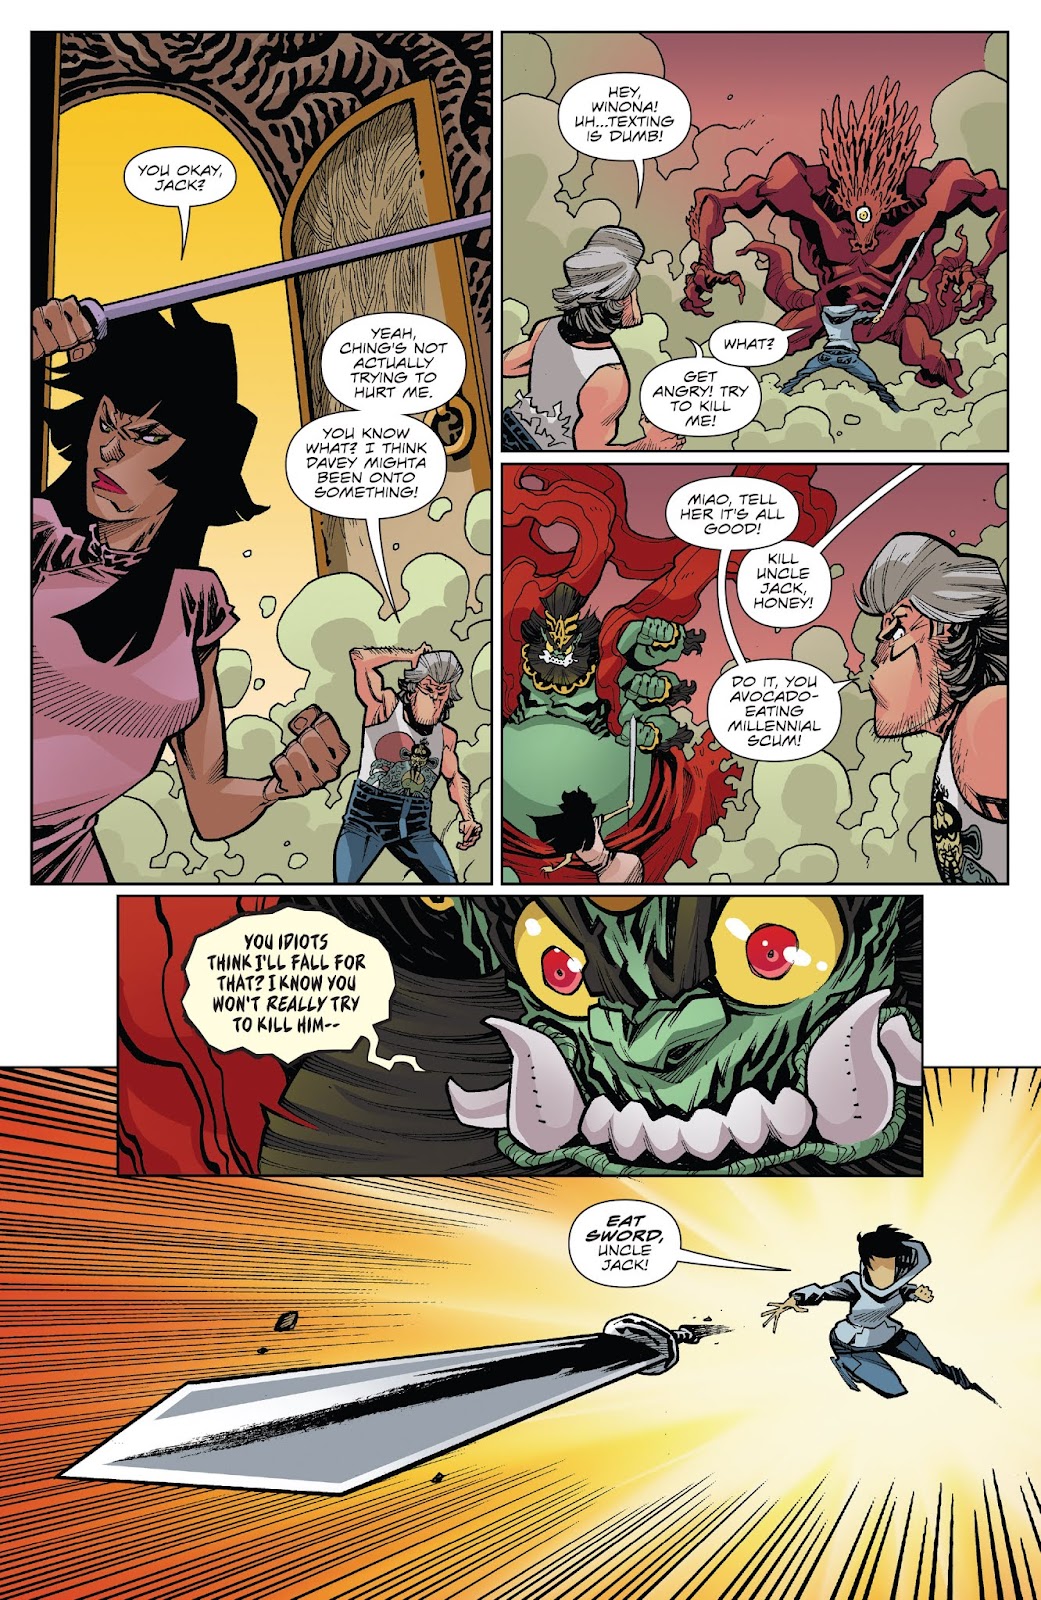 Big Trouble in Little China: Old Man Jack issue 9 - Page 21